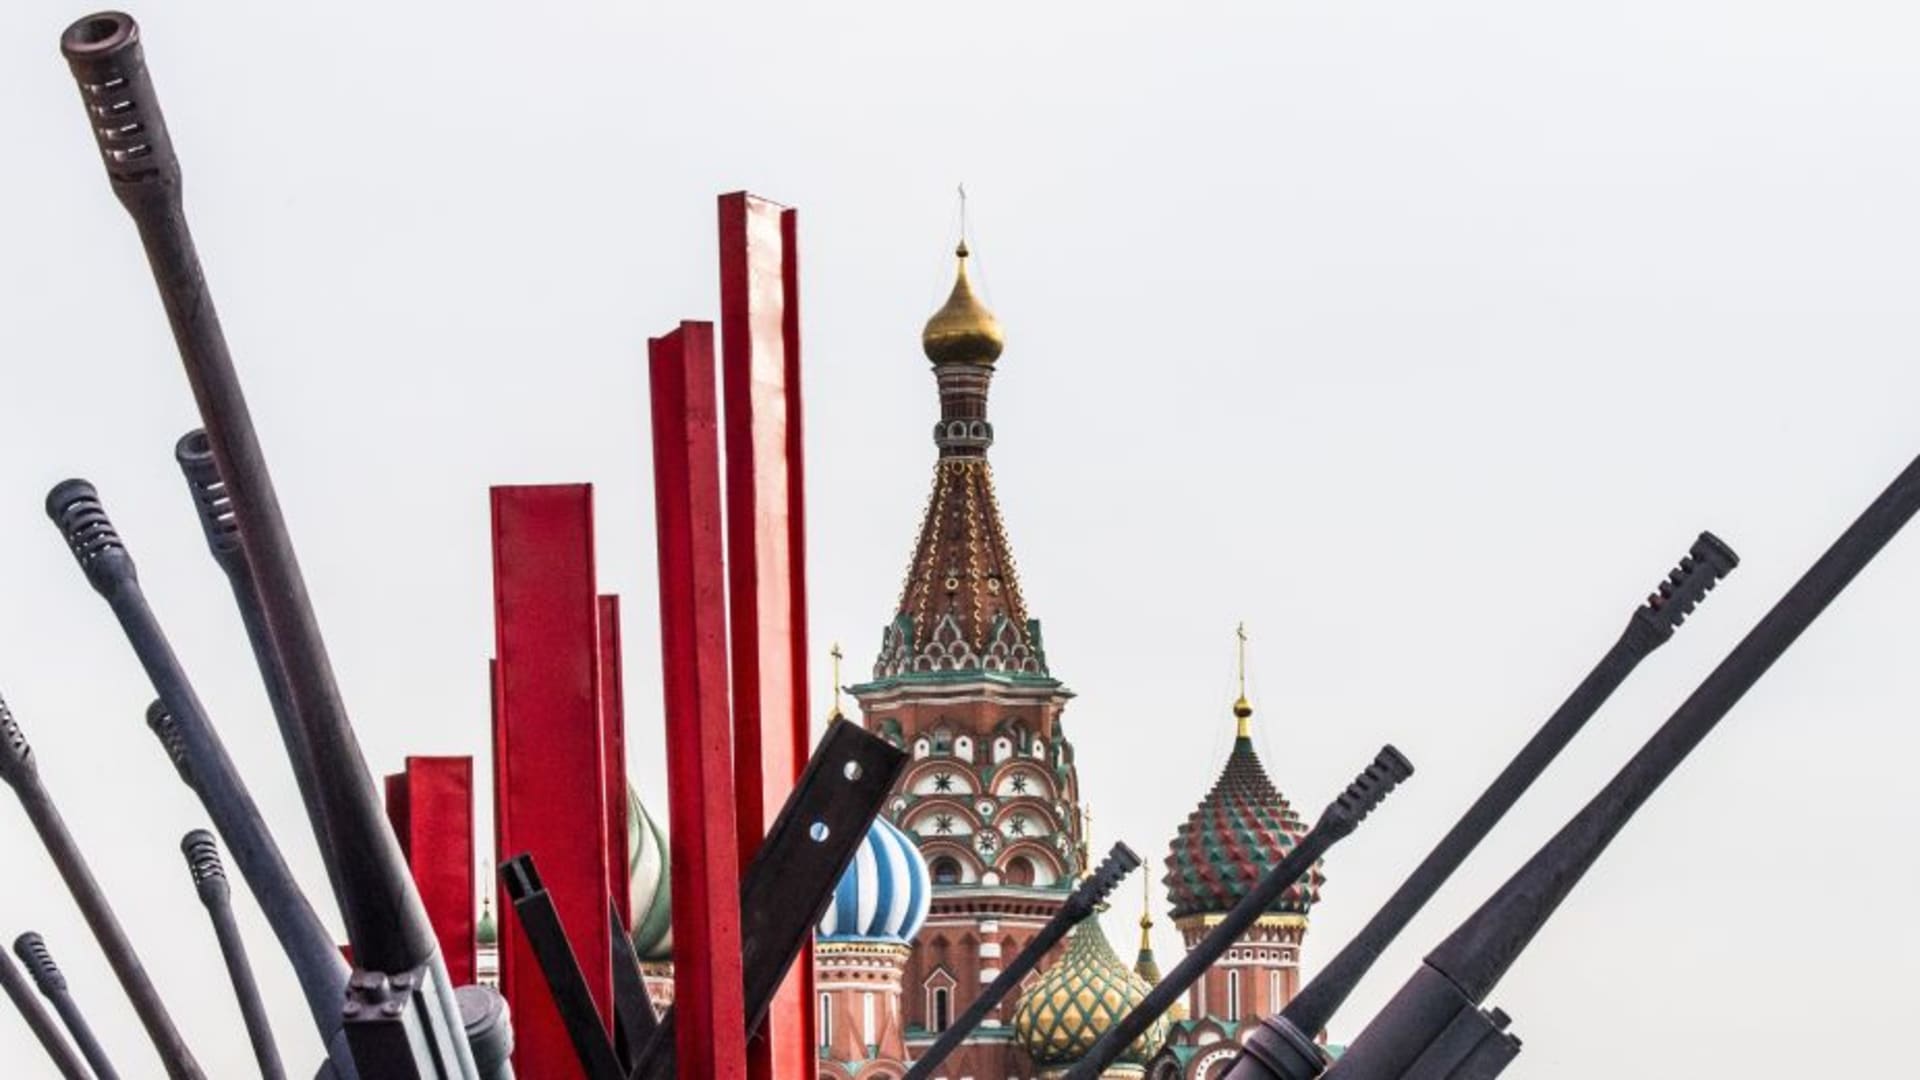 Replicas of WWII gun barrels stand on the Red Square for a military parade in Moscow on November 2, 2018.